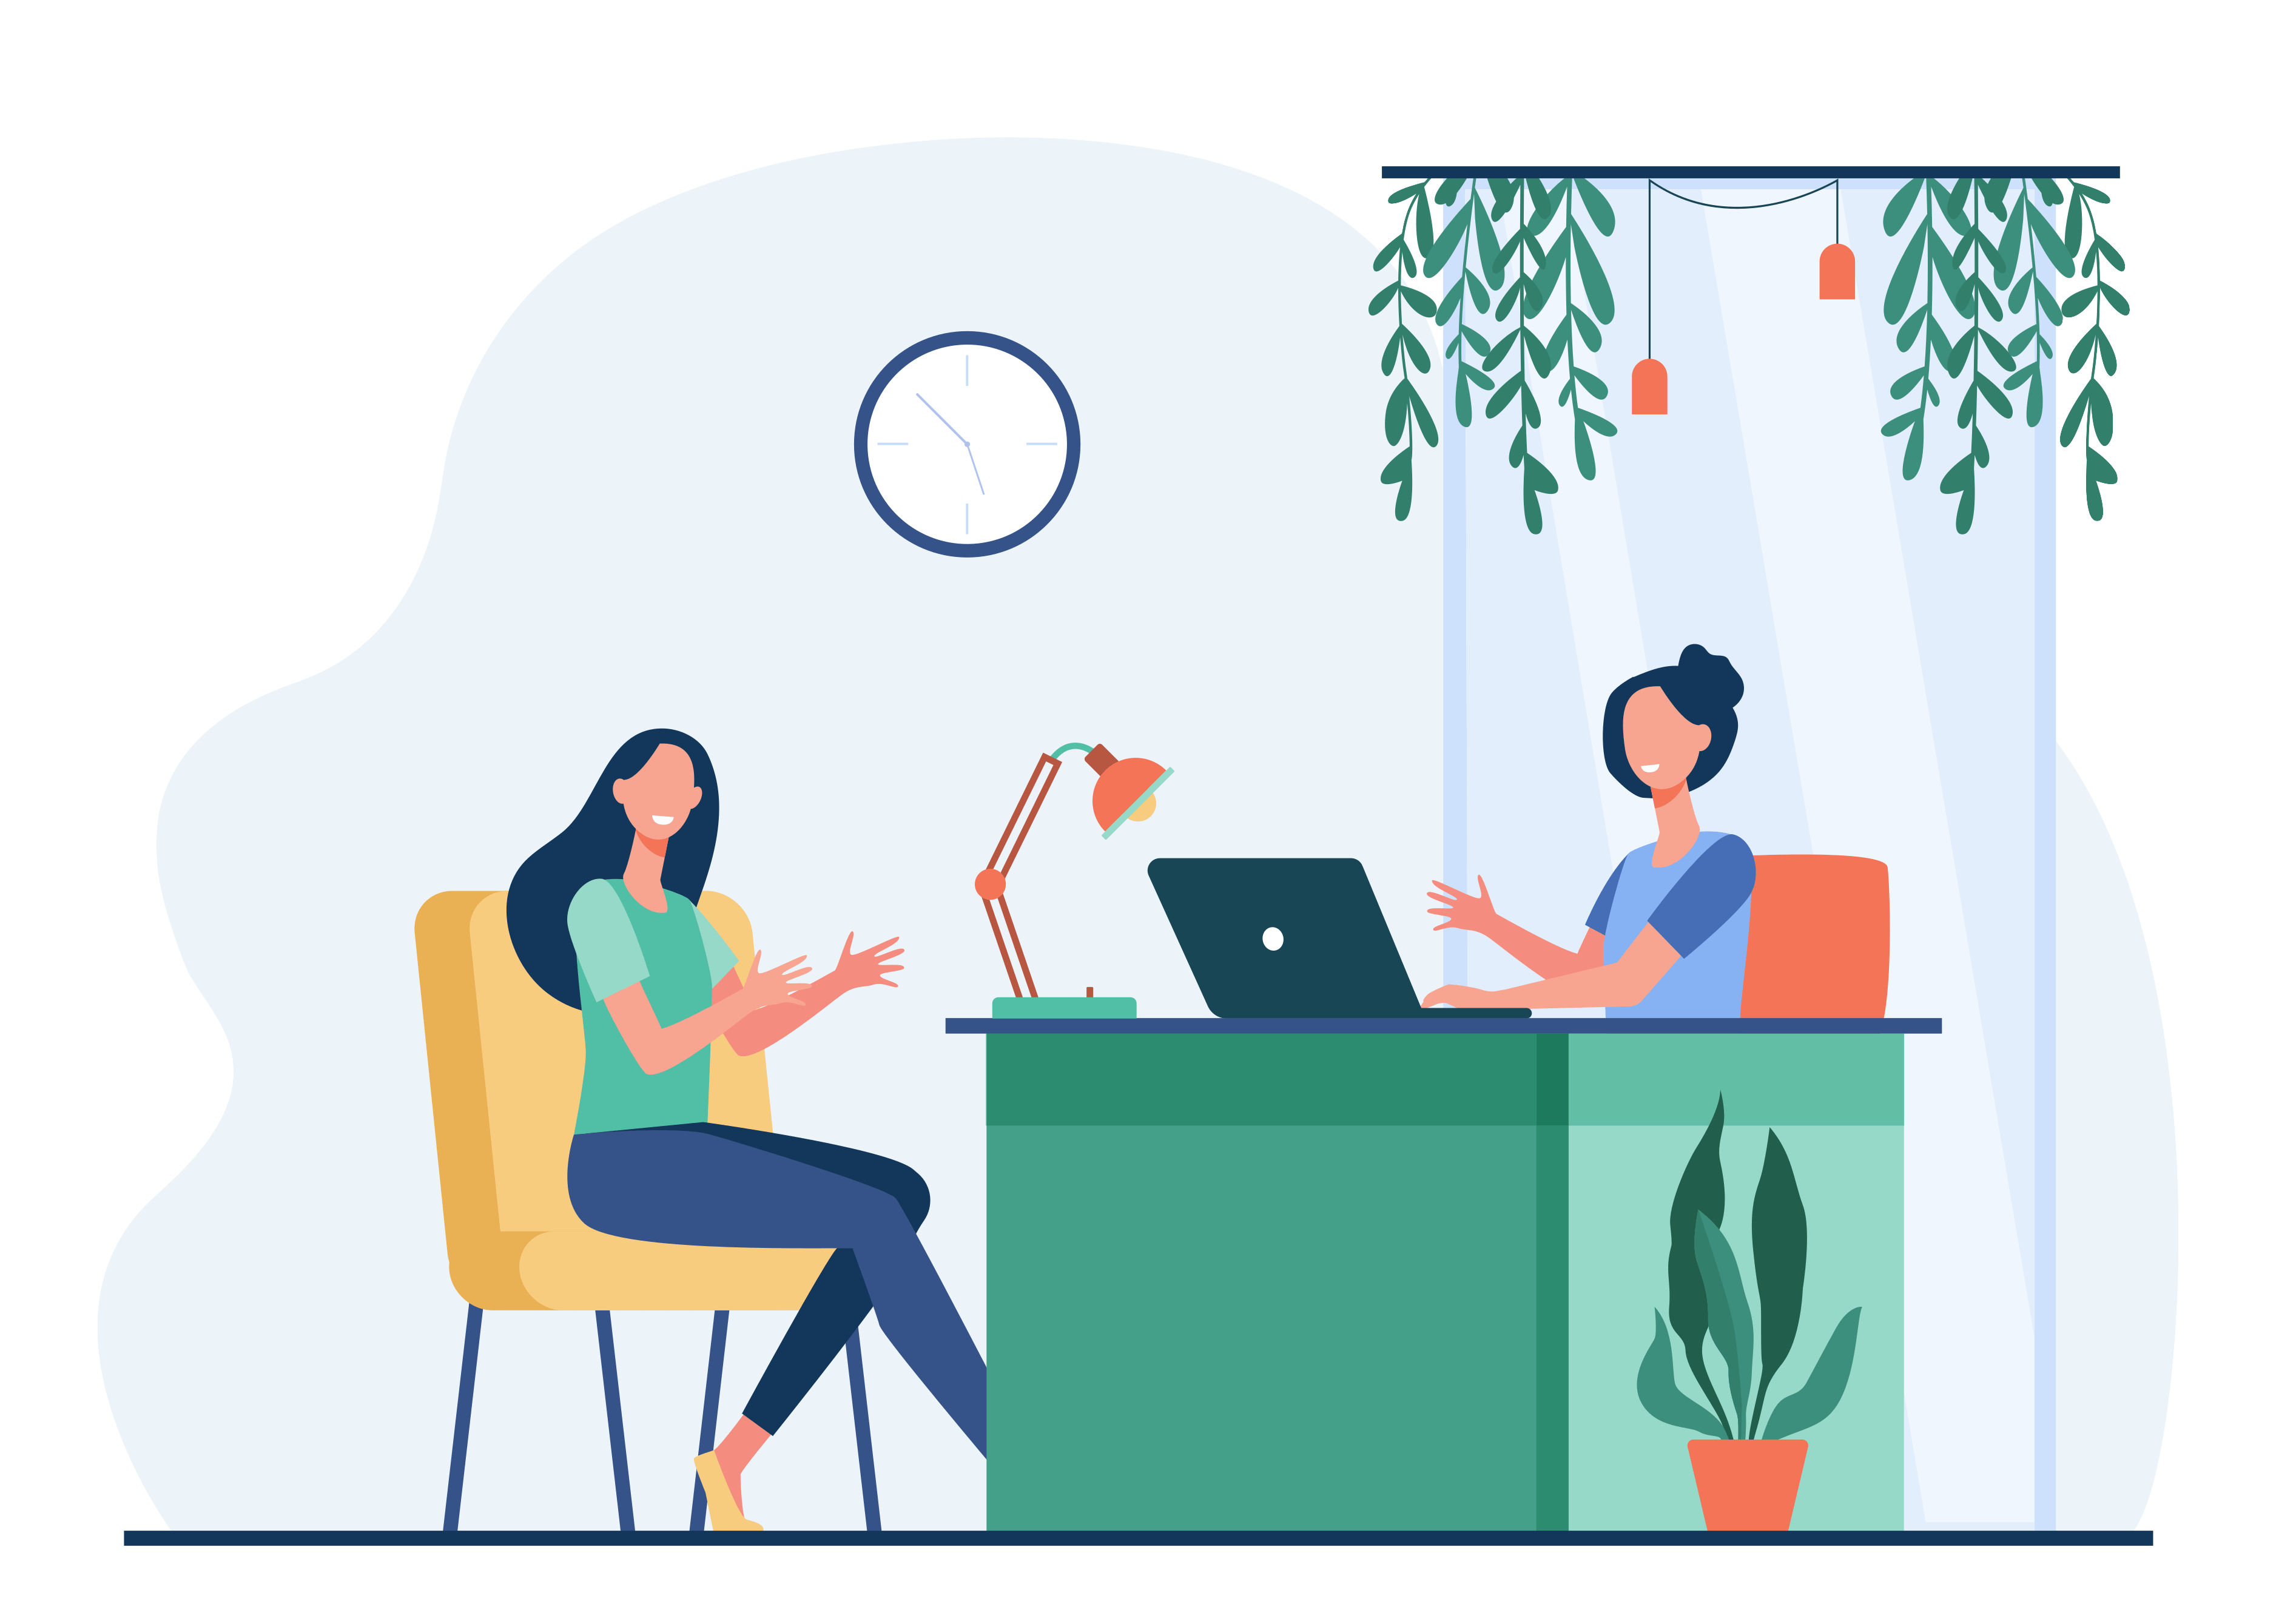 A vector of two humans in a business meeting